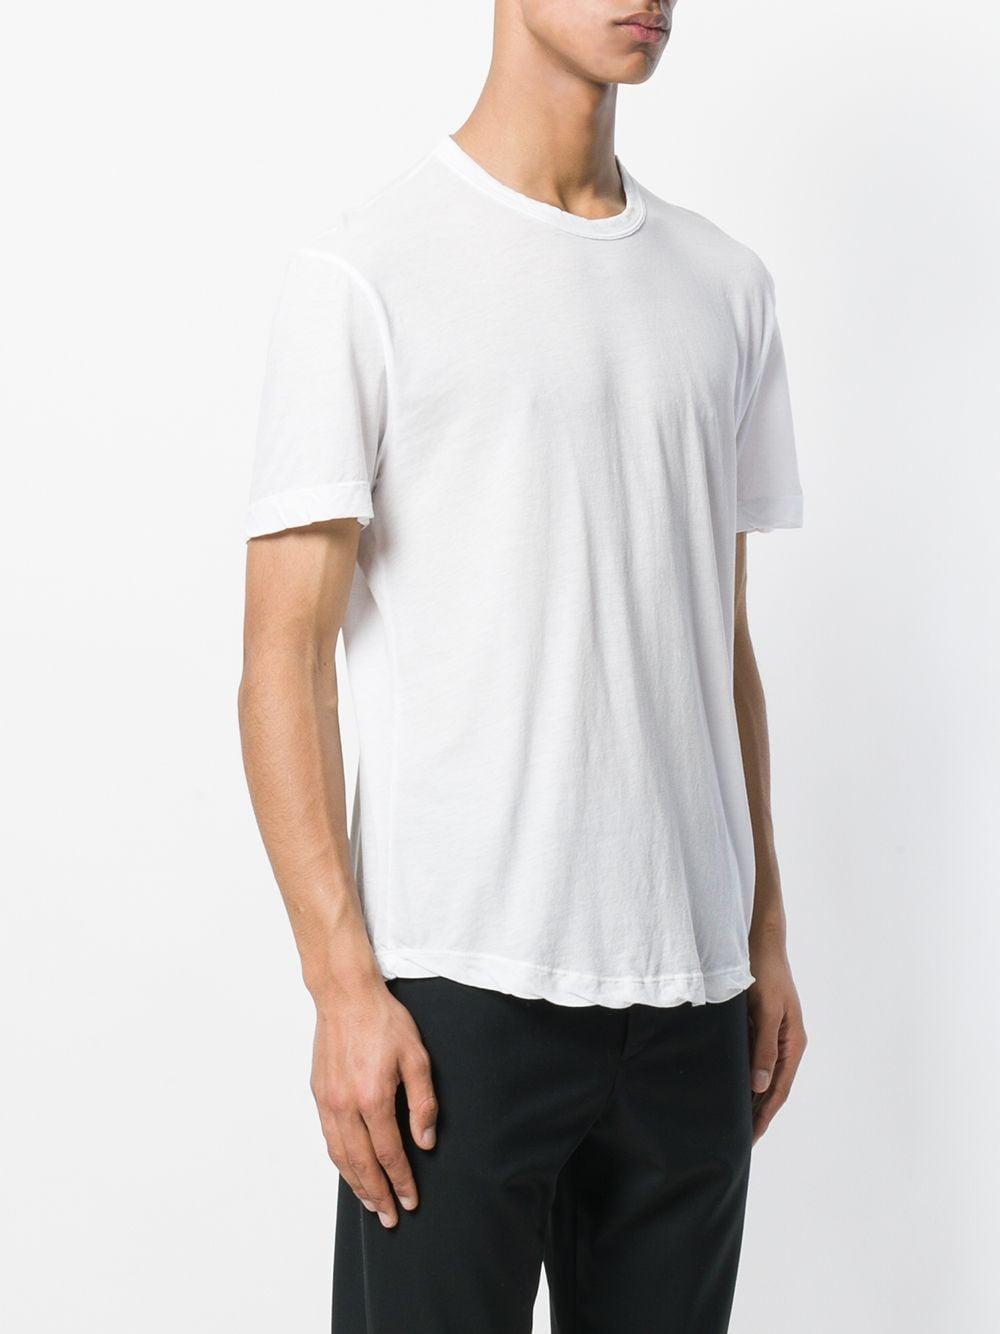 James Perse Cotton Round-neck T-shirt in White for Men - Lyst